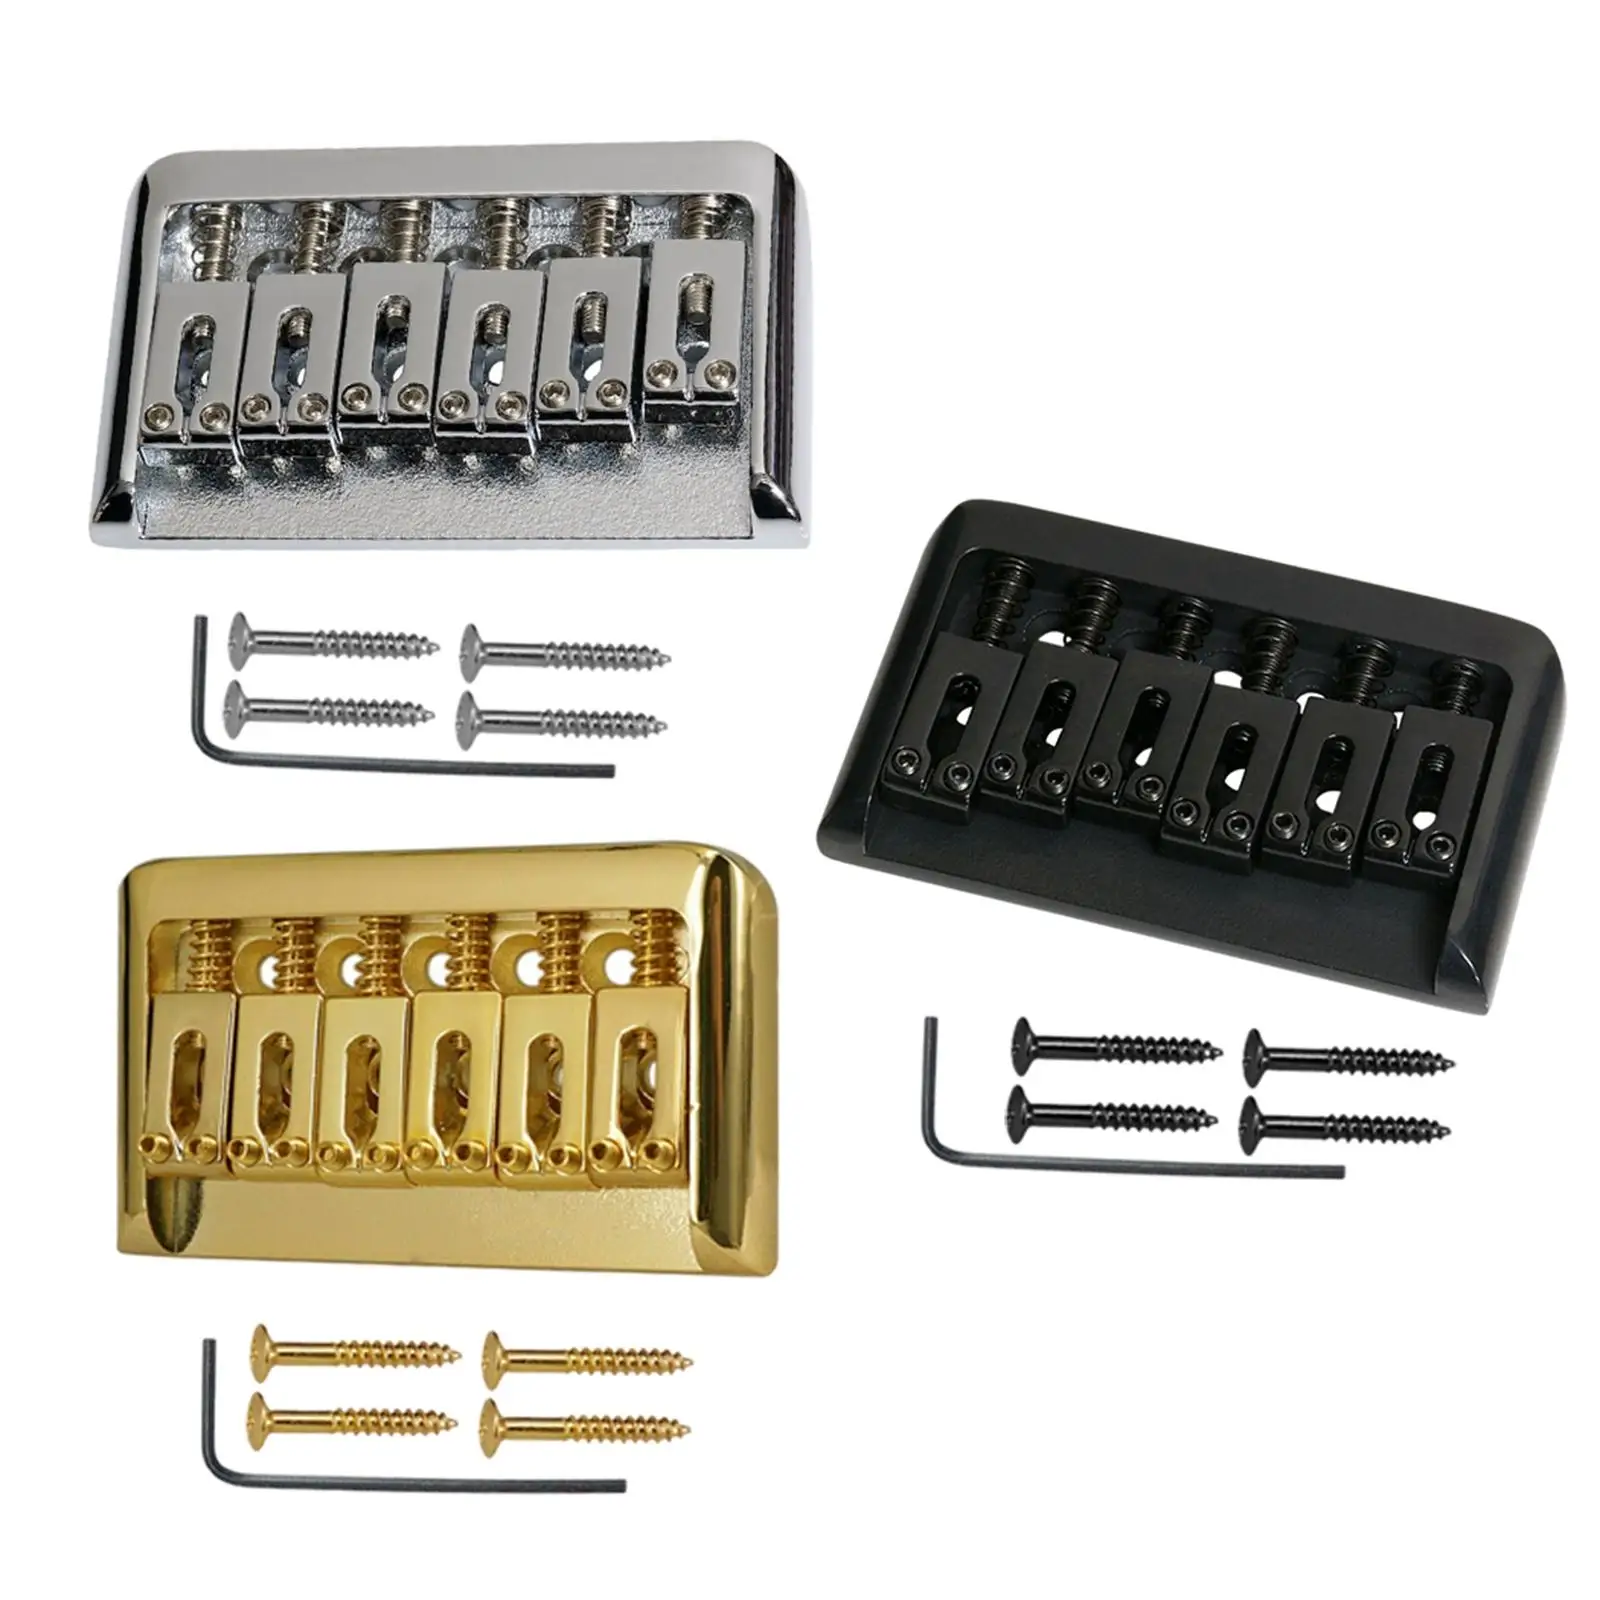 Metal Fixed Rigid Saddle Bridge, Cargo Guitar Tailpiece with Key Screws for 6 String Electric Guitar Parts